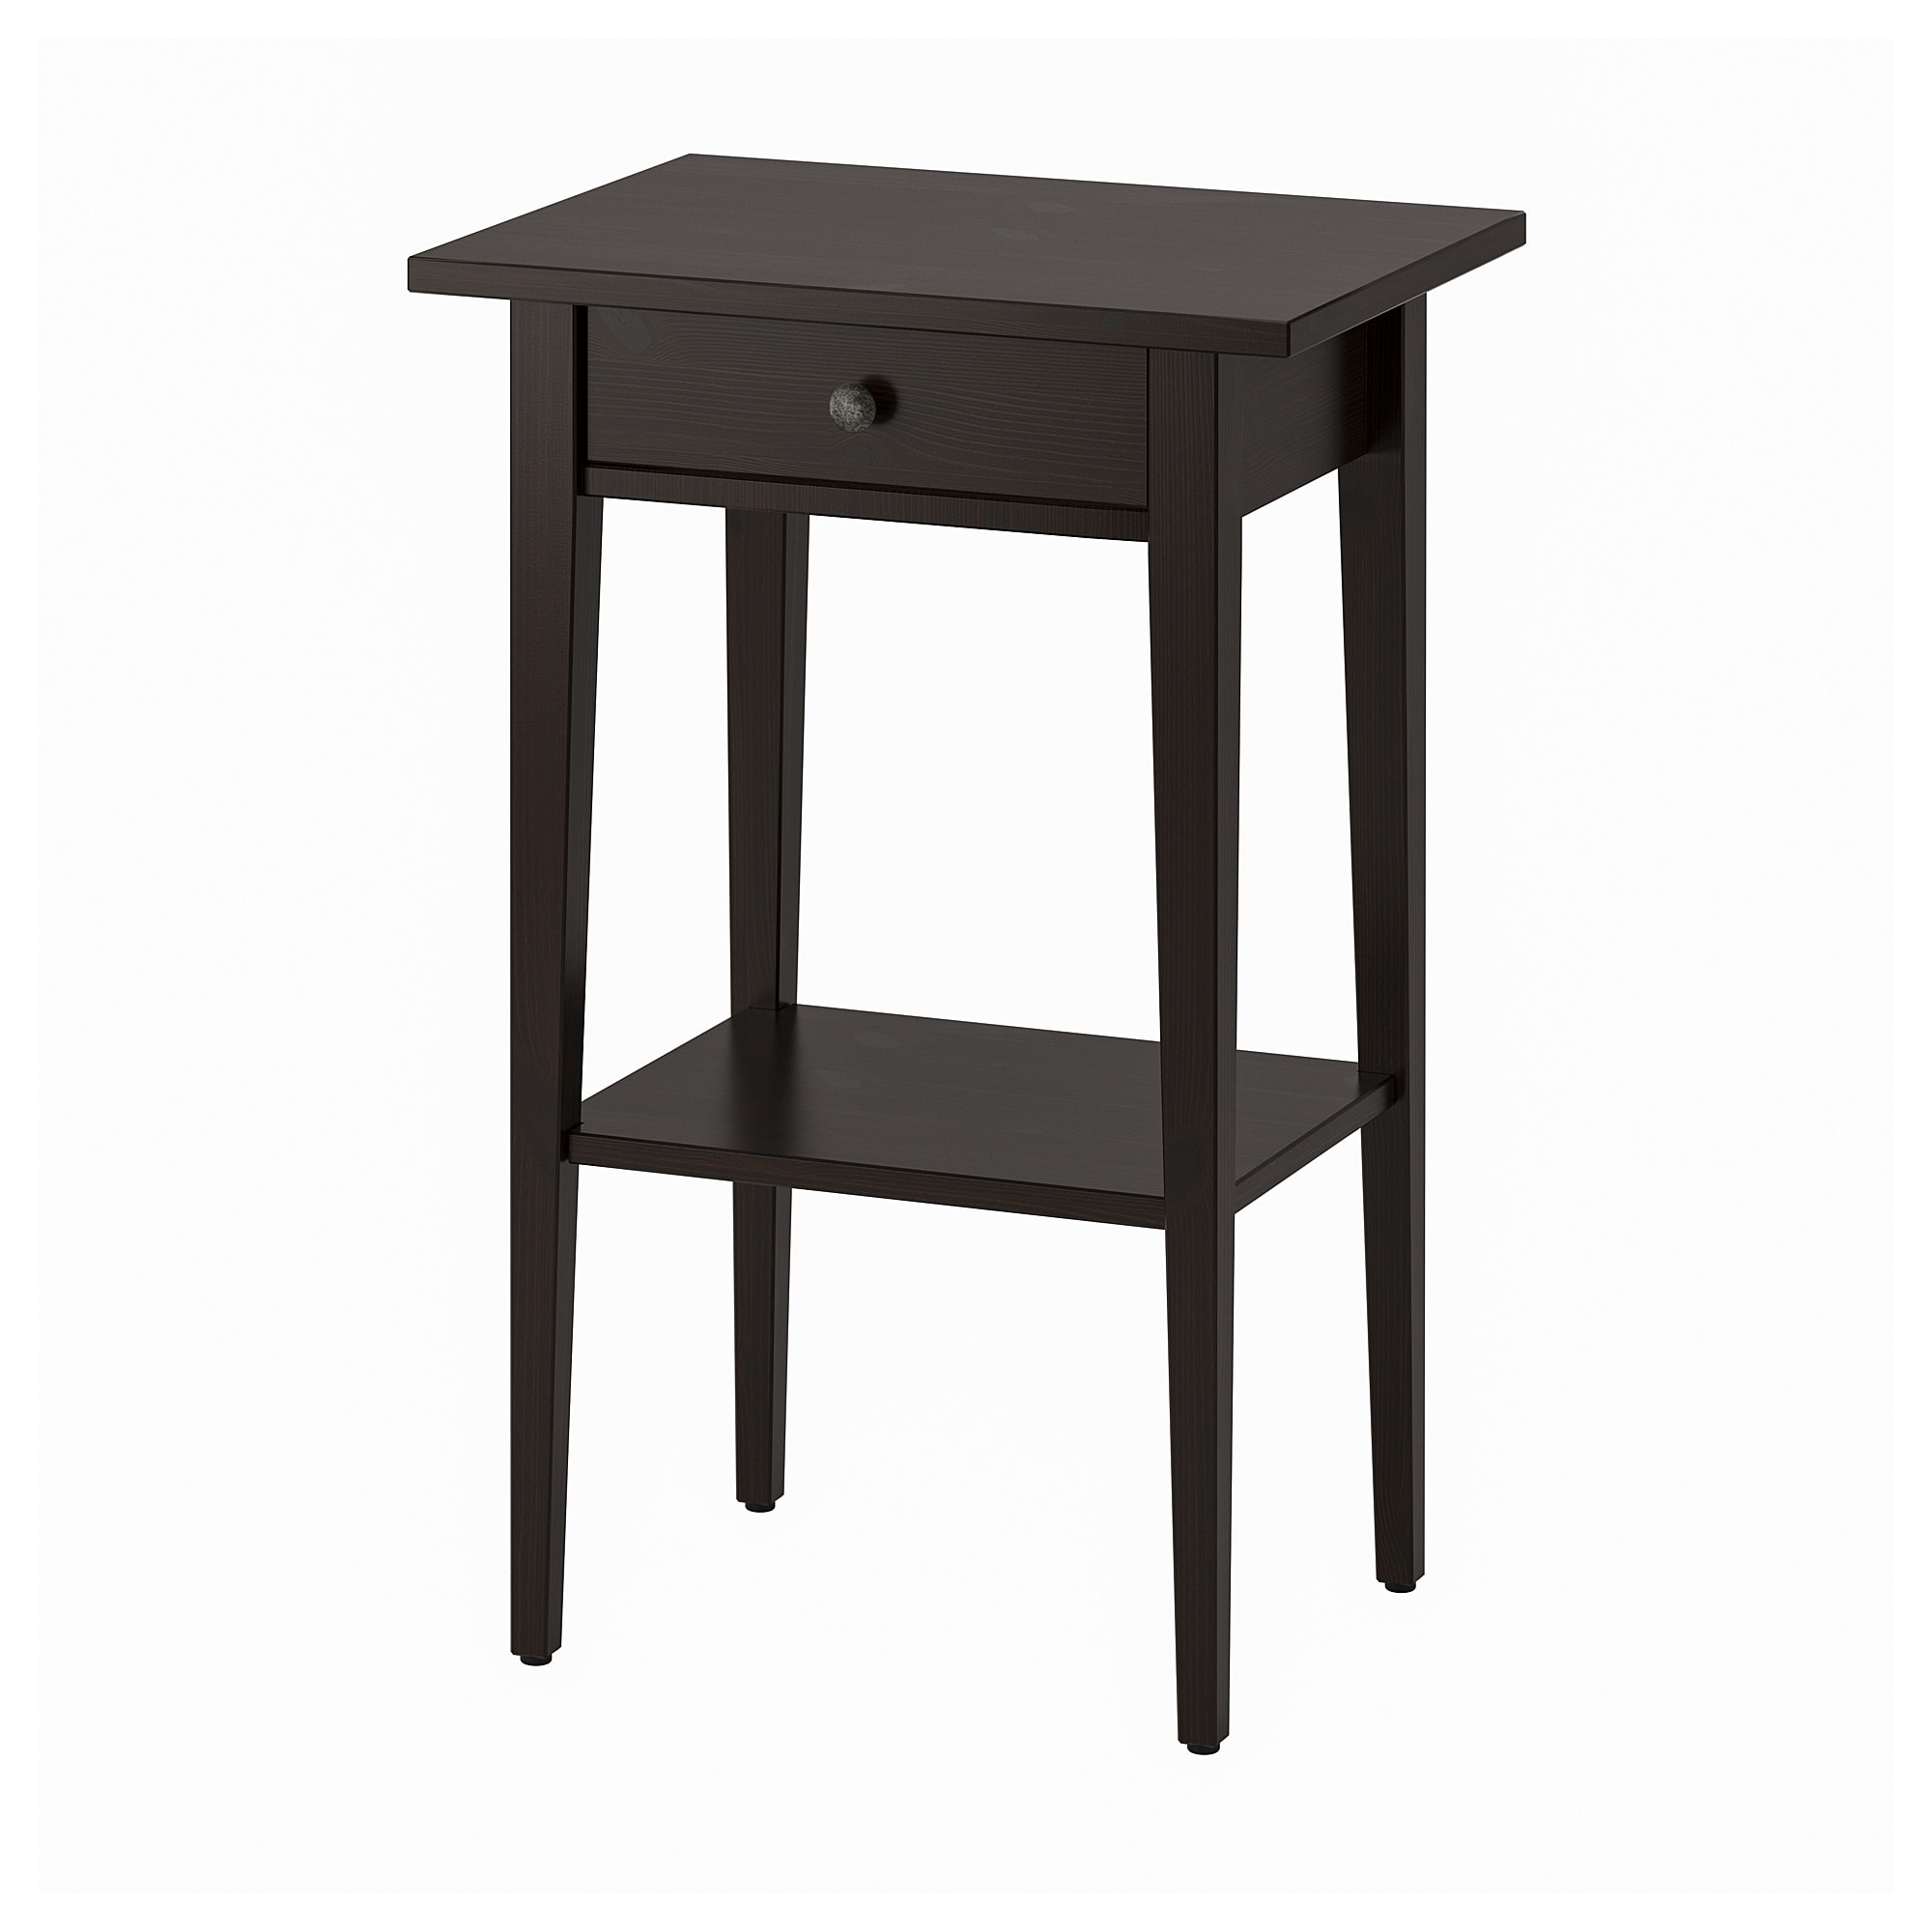 hemnes nightstand black brown ikea accent table with drawer feedback inch square vinyl tablecloth for oval dining antique oak bedside tables mirror target round cooler lamps usb